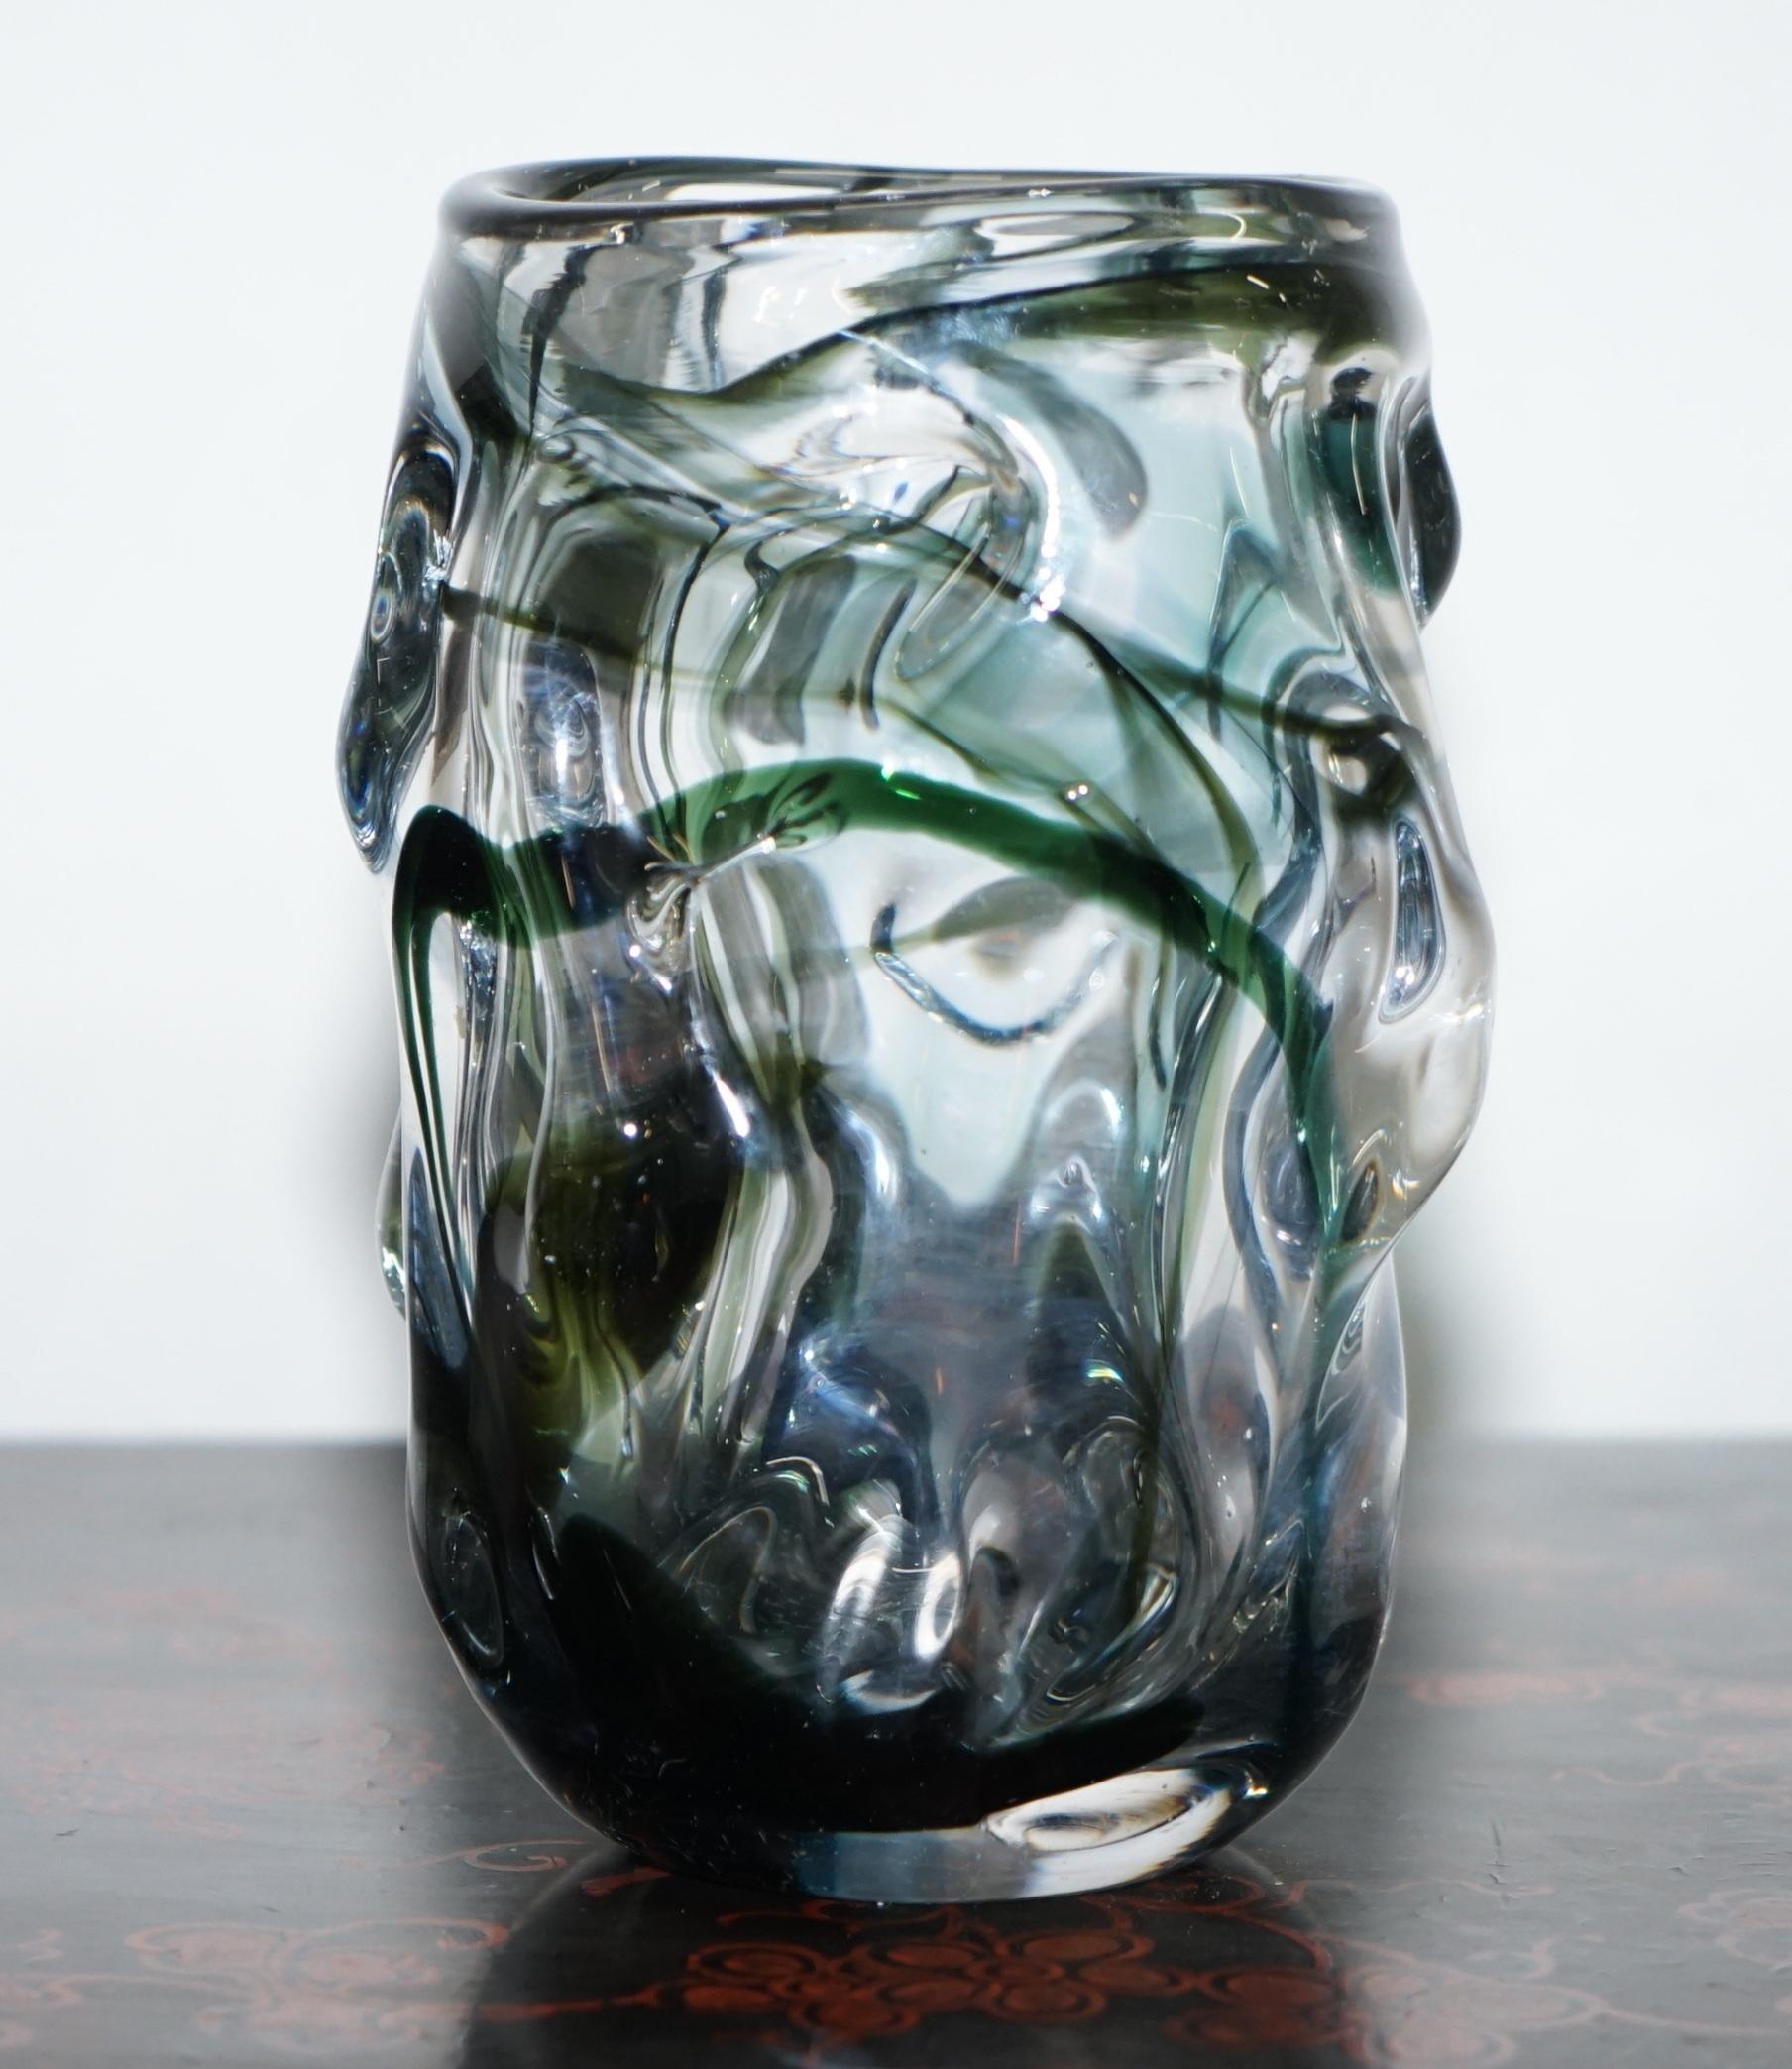 Hand-Crafted One of Three Stunning Whitefrairs Vases with Ornately Crafted Bodies, Medium